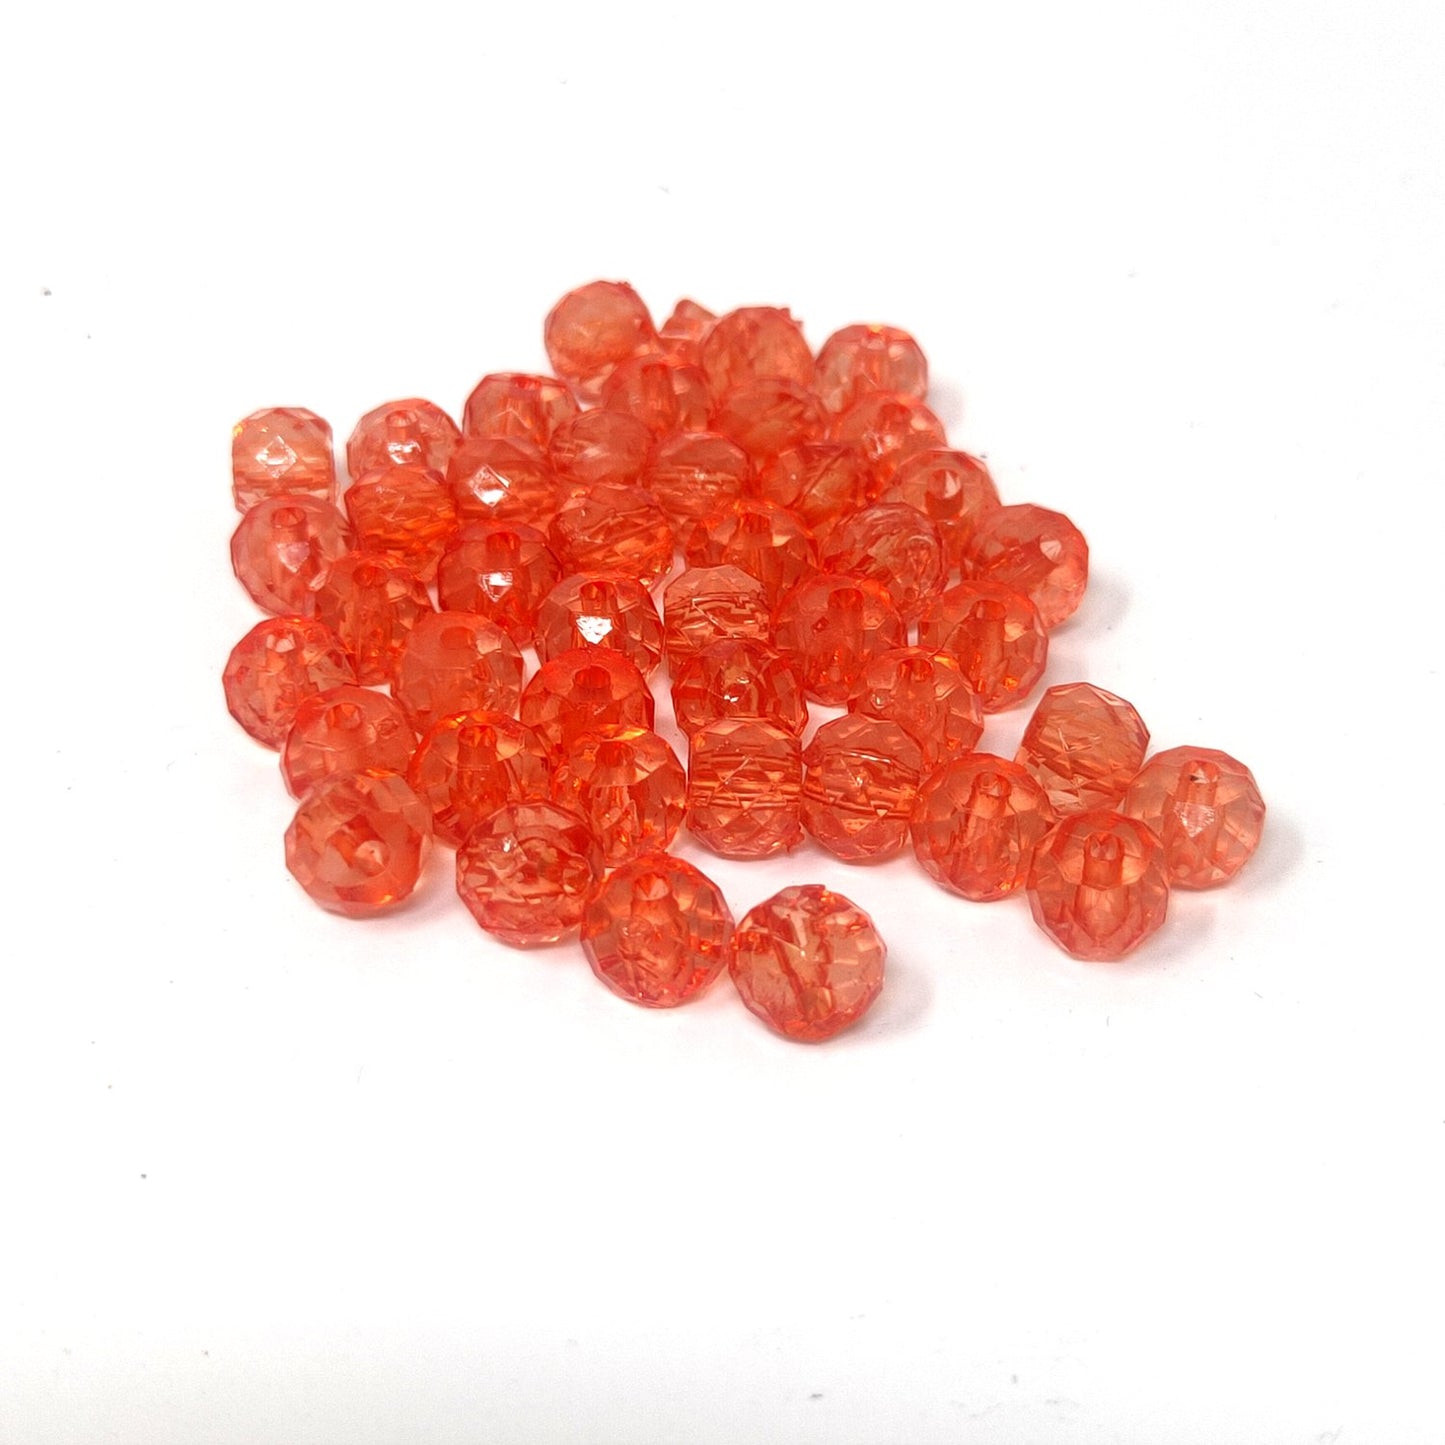 8 mm Translucent Crystal Beads for Jewellery Making and Decoration (100 Beads) - 96-01